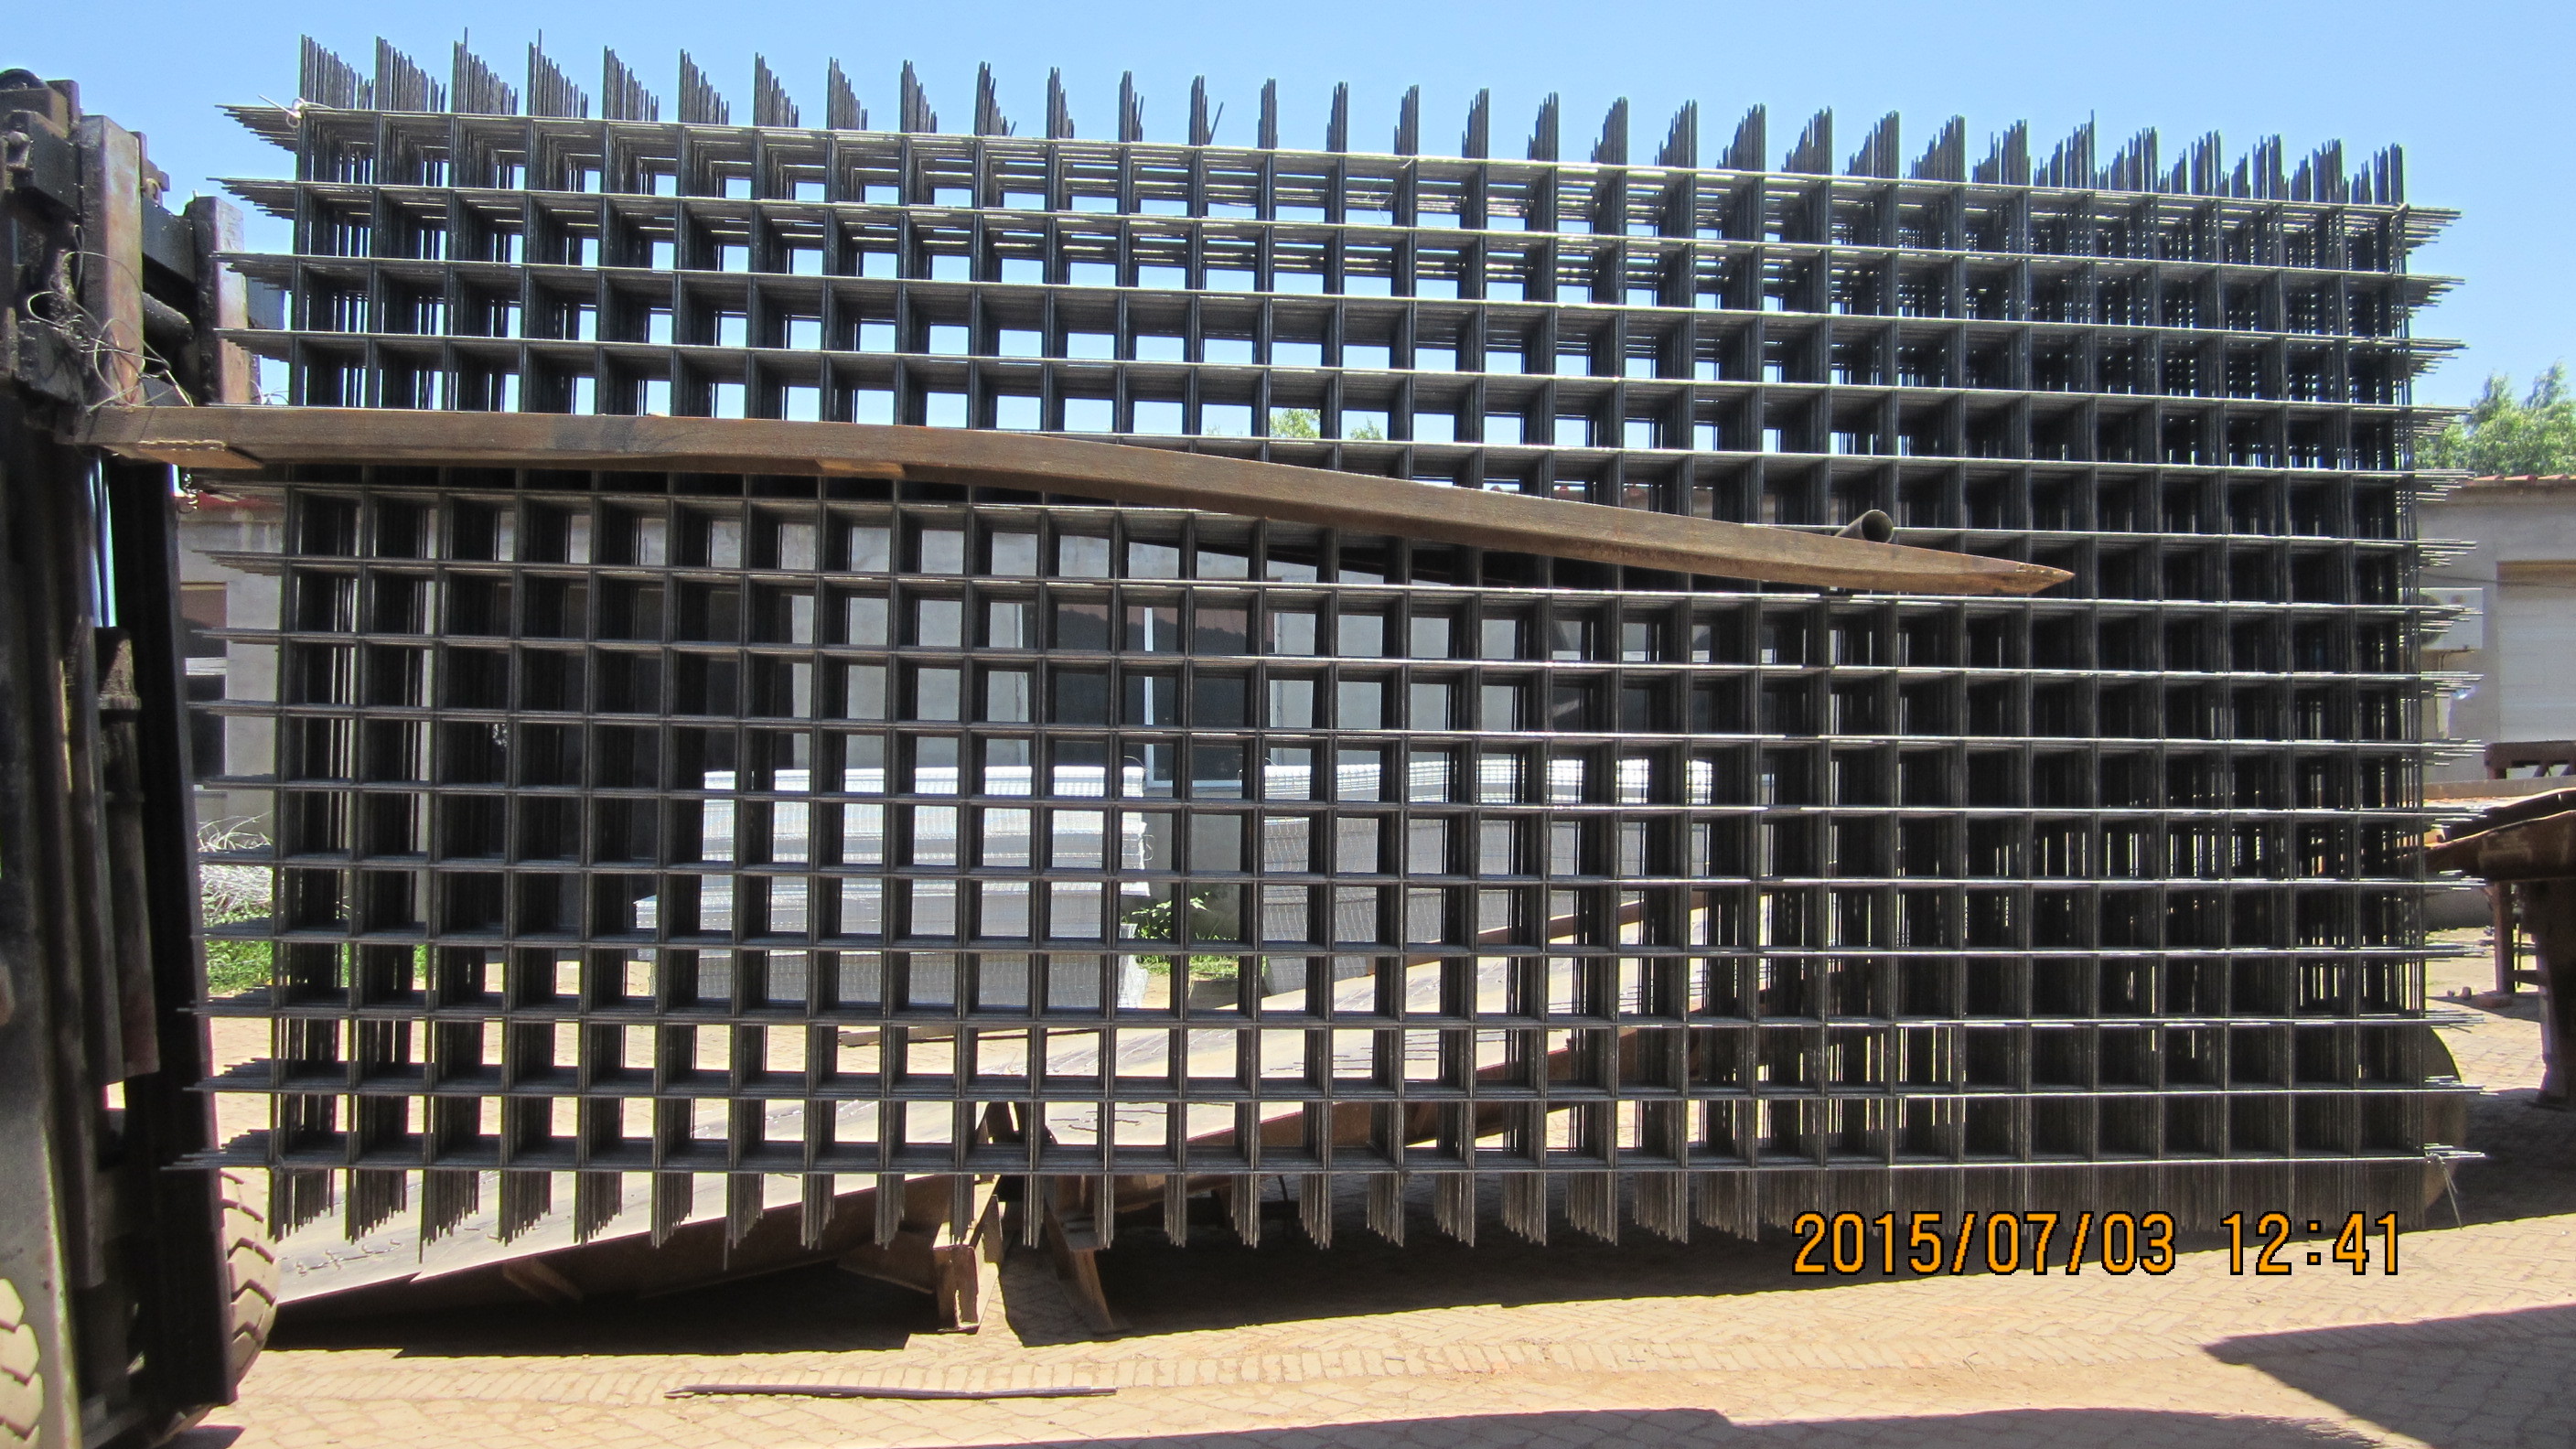 Quality Reinforce Mesh Panel,Construction Mesh Panel,Heavy welded panel,5.8mmx6"x6"x2.35x5.8m for sale